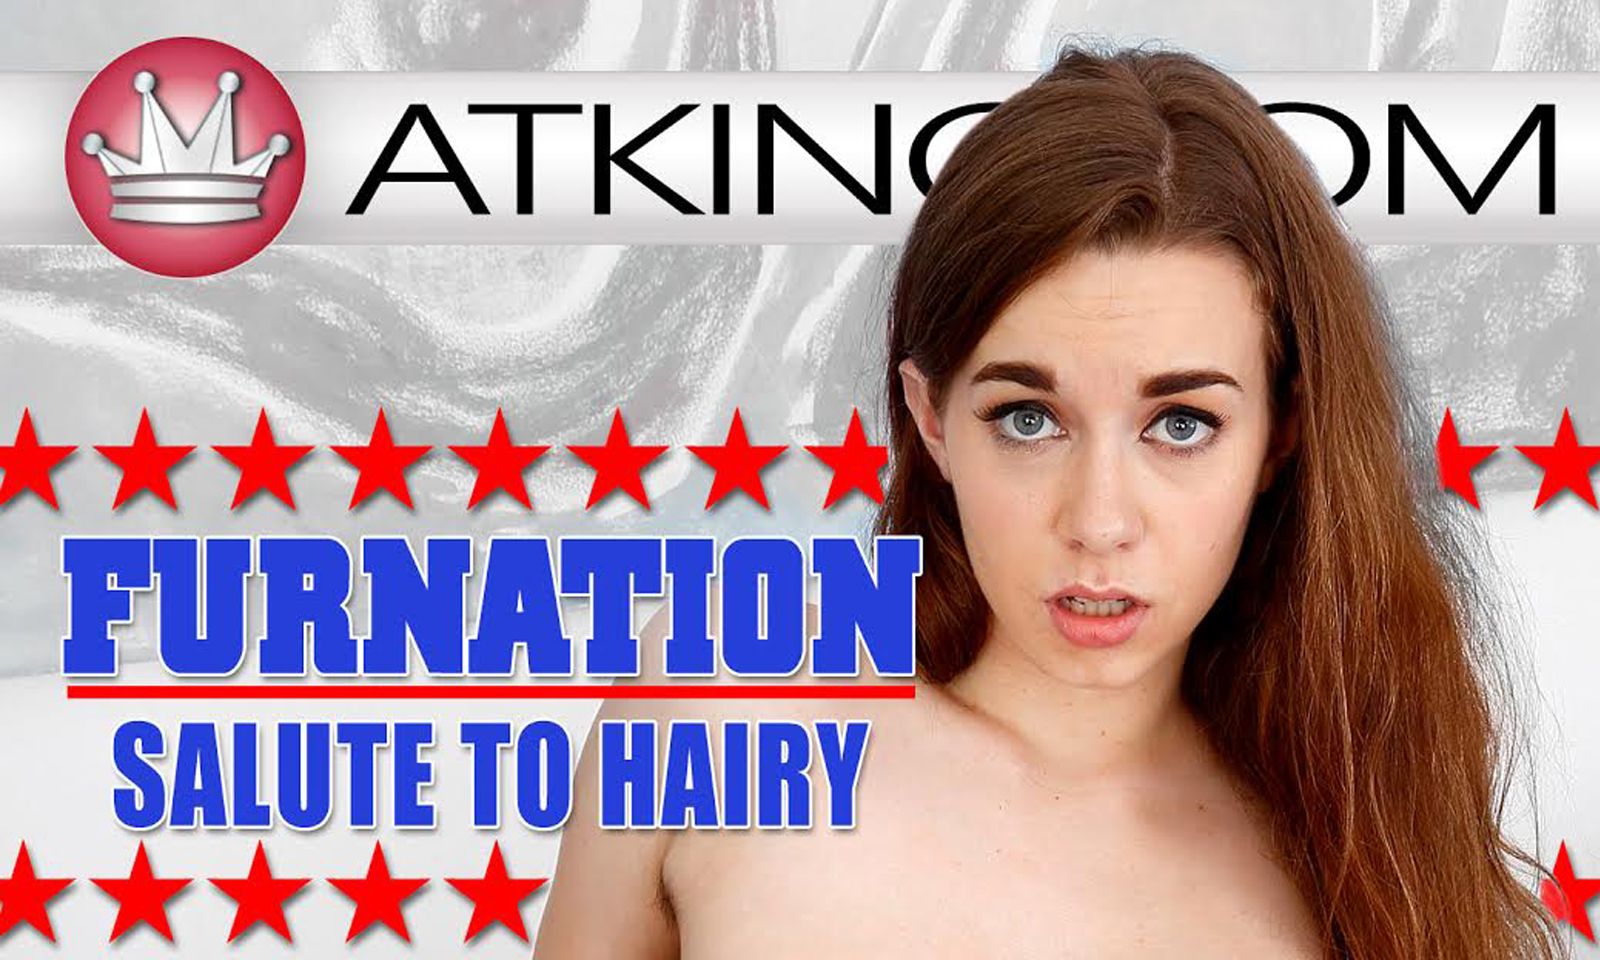 ATKingdom Releases ‘Furnation: Salute to Hairy’